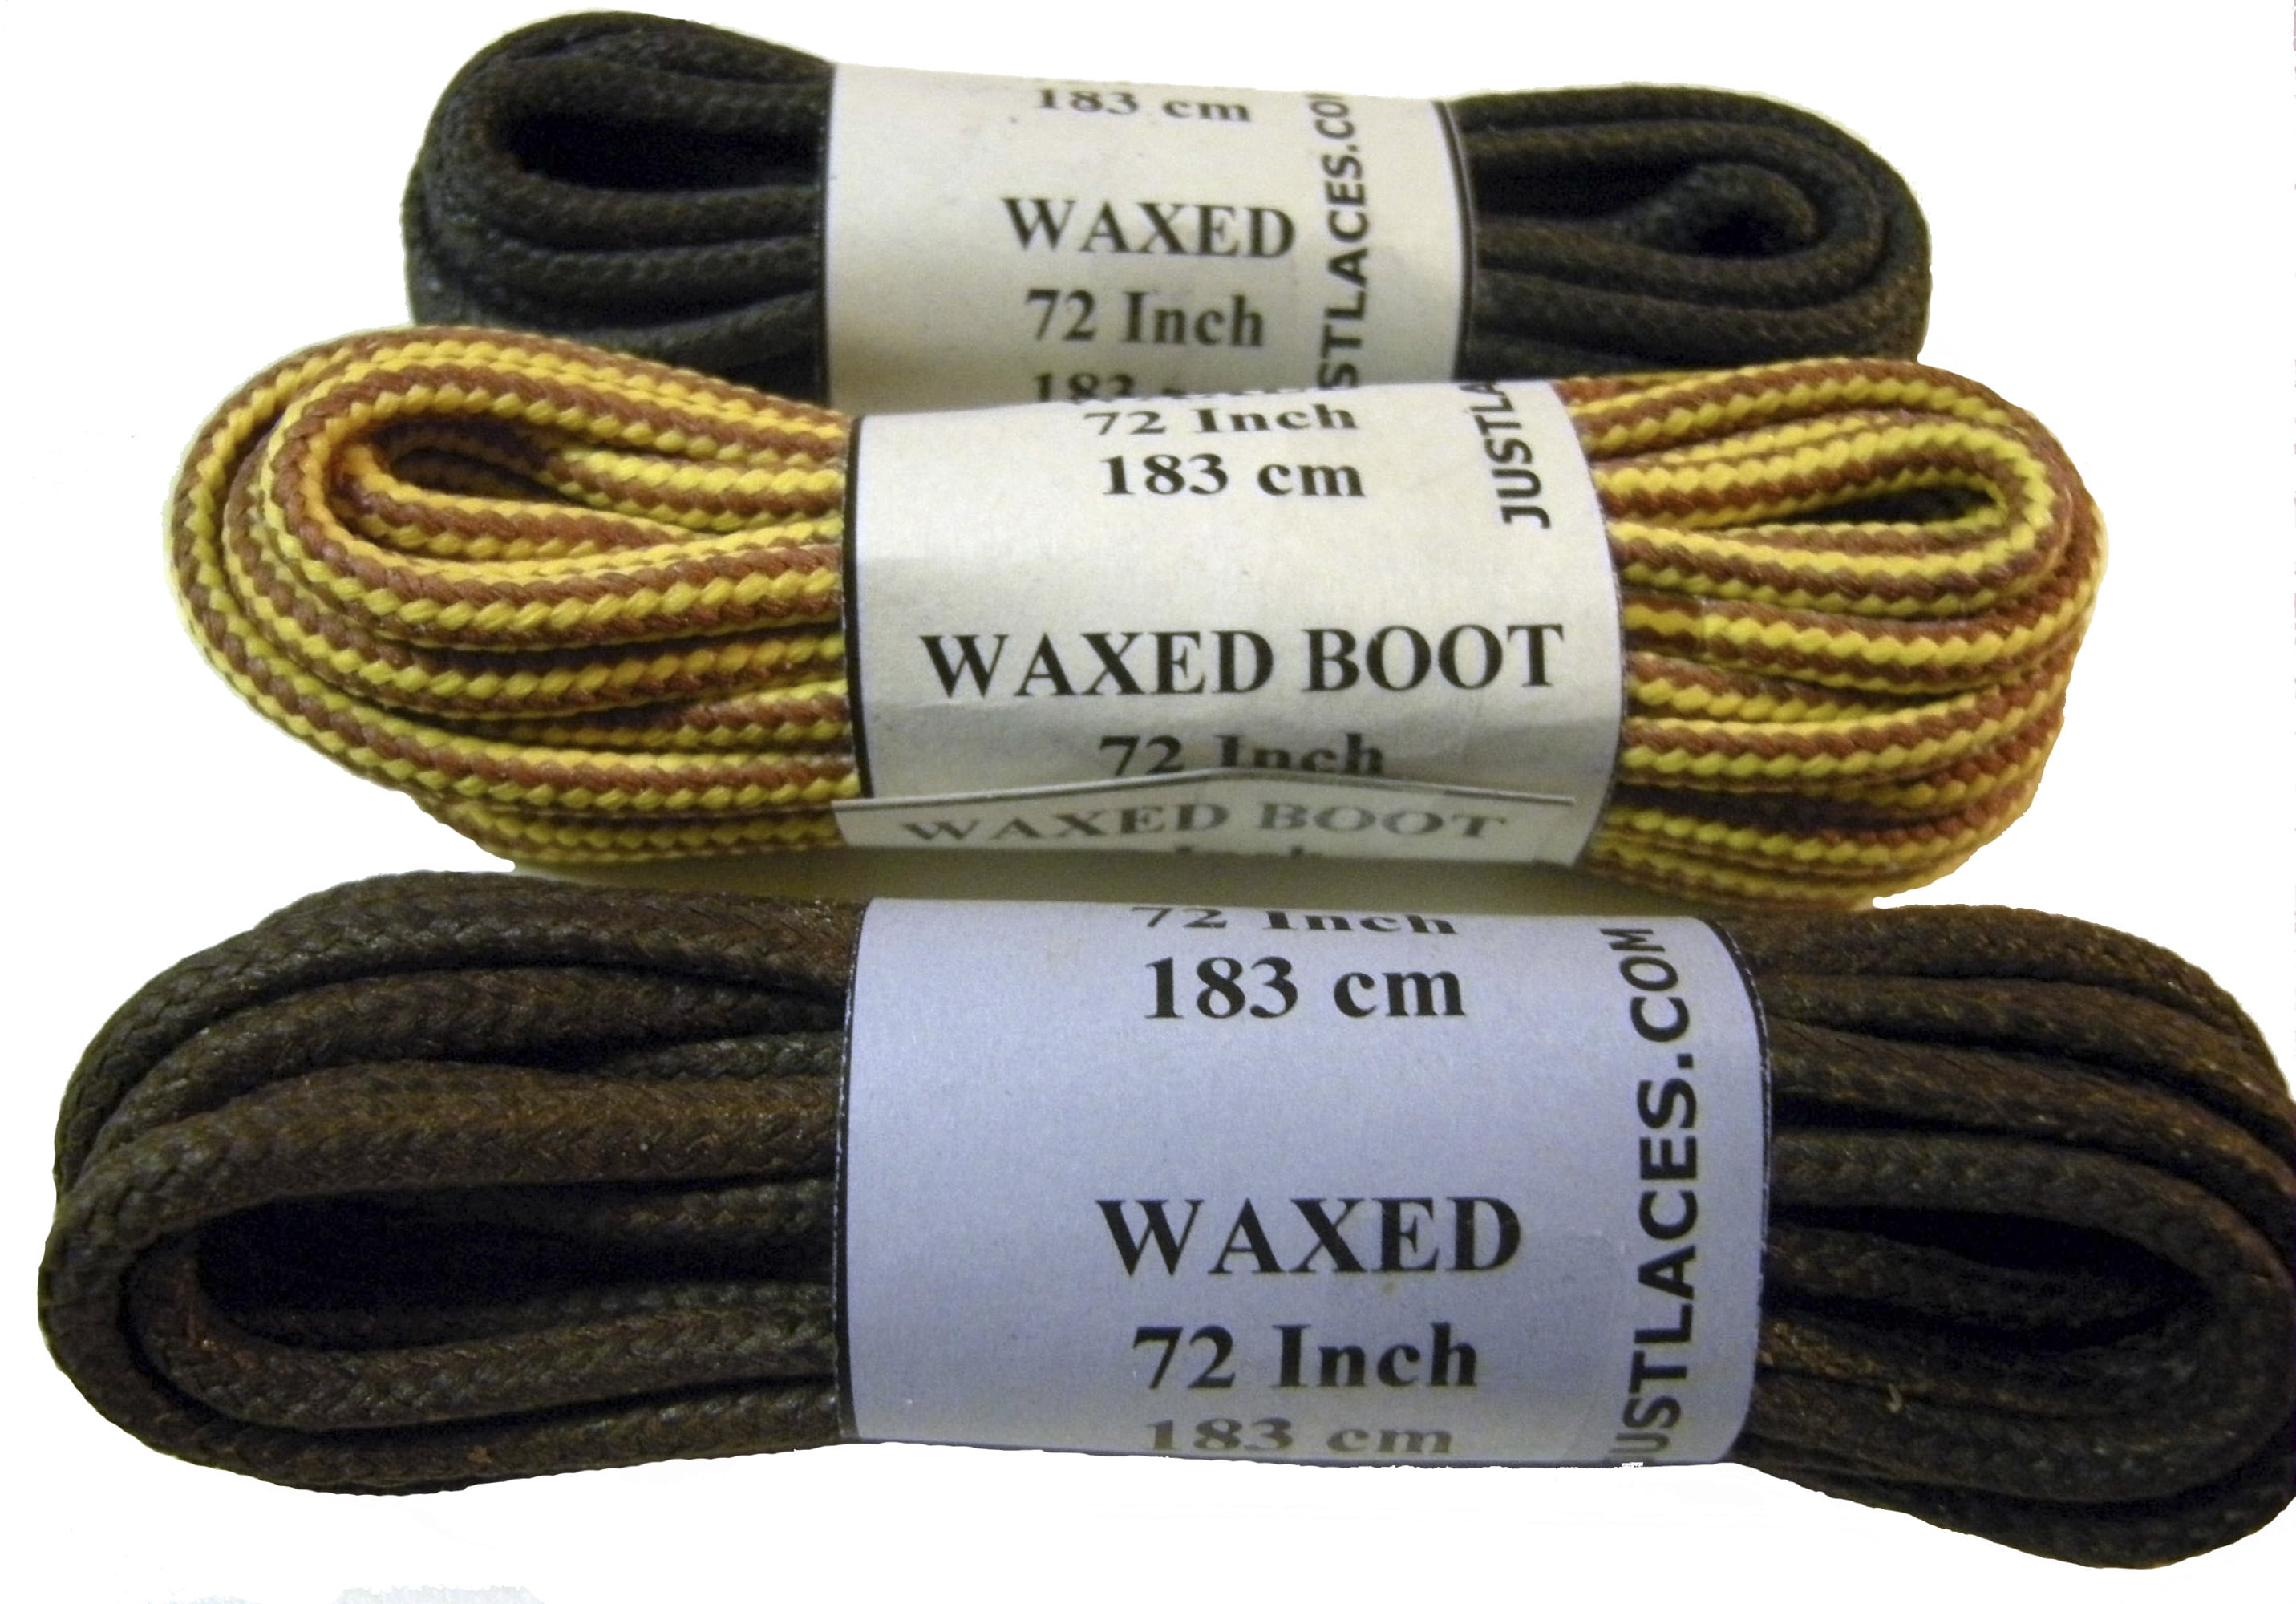 160cm//63inch Black Running Shoelaces Heavy Duty Athletic Shoe Laces Waxed Thin Round Dress Shoelaces Work Boot Laces Hiking Shoes Laces for Work Boots /& Hiking Shoes 4 Pairs Round Boots Laces